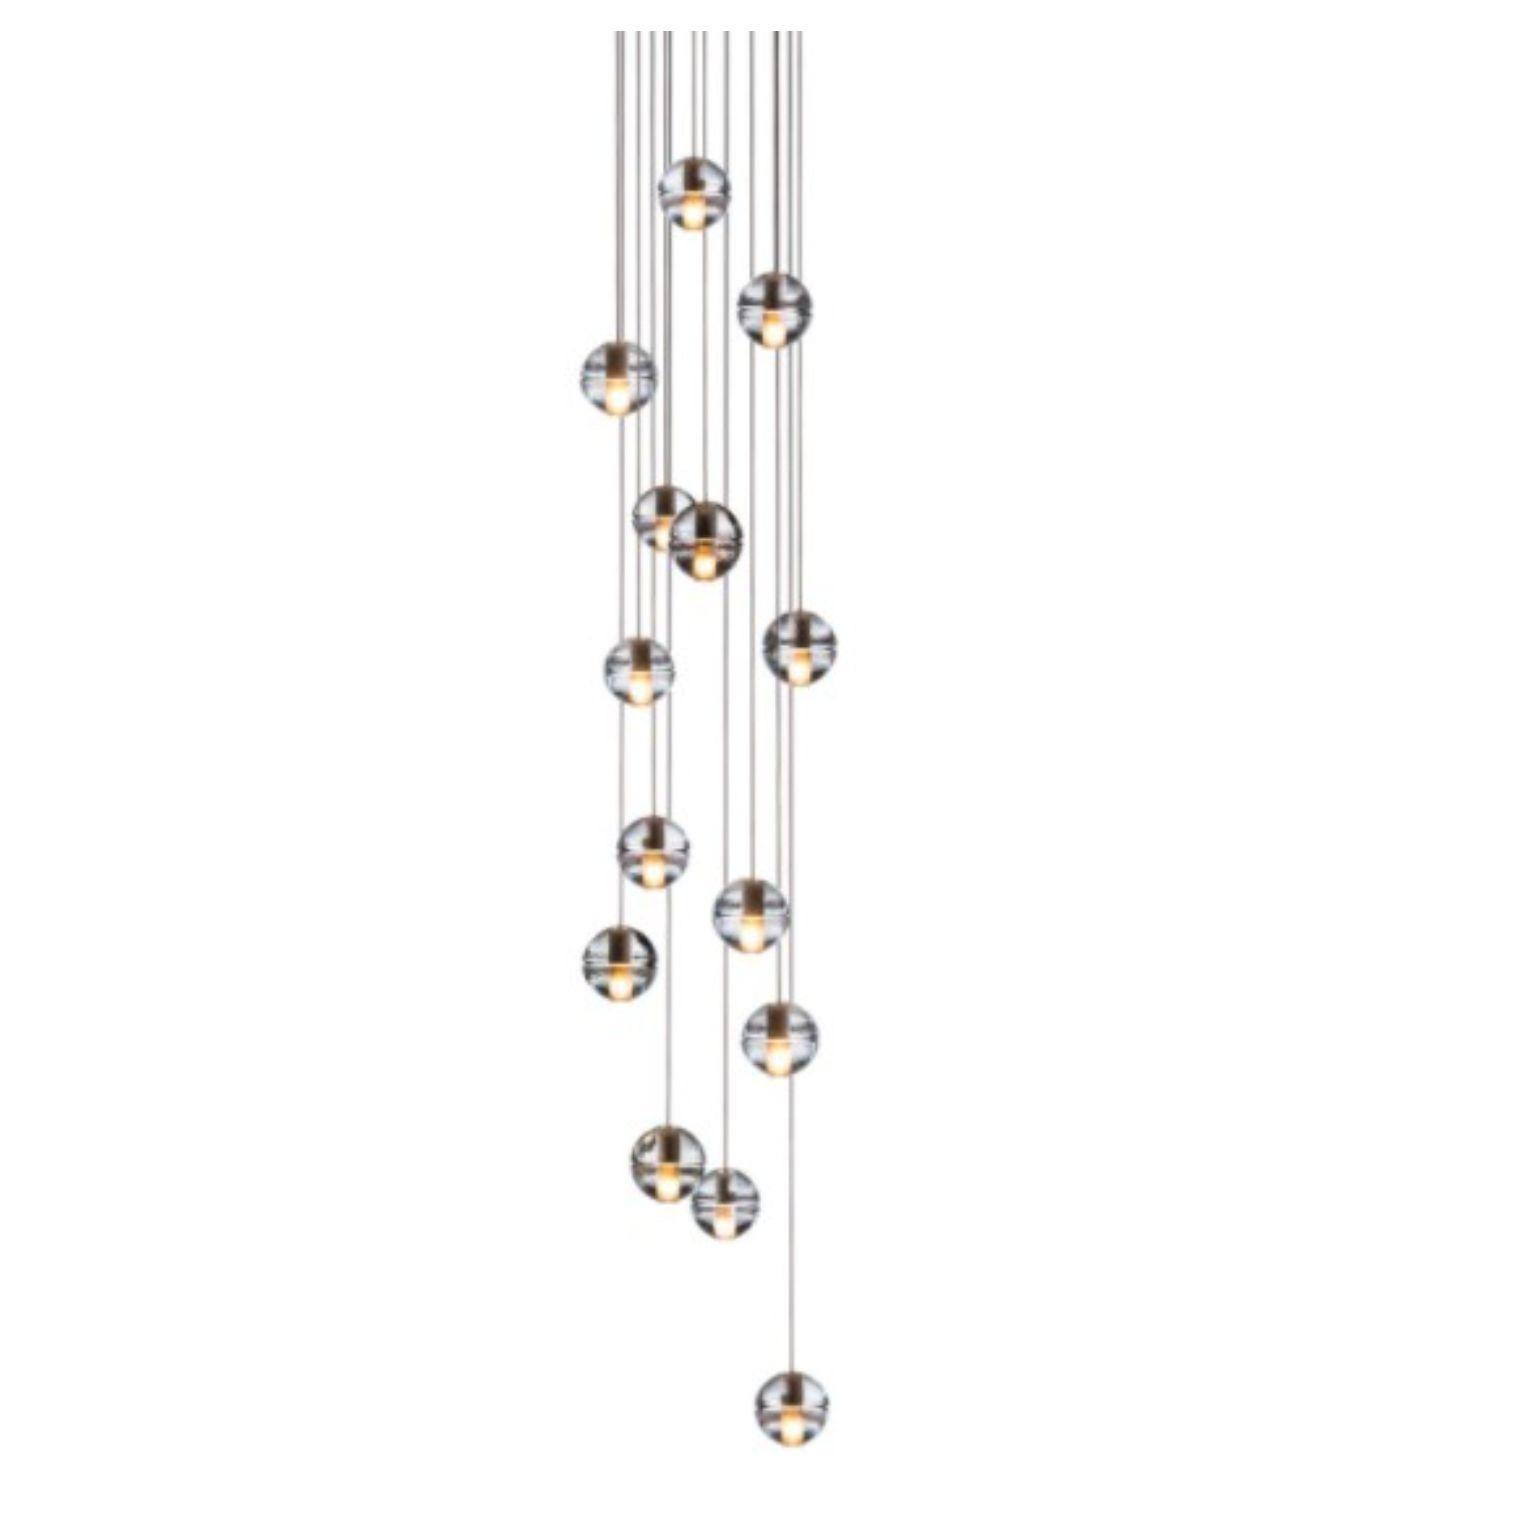 14.14 Round Pendant by Bocci
Dimensions: D50.8 x H300 cm
Materials: white powder coated round canopy
Weight: 37 kg
Available: Round and Rectangle version.

All our lamps can be wired according to each country. If sold to the USA it will be